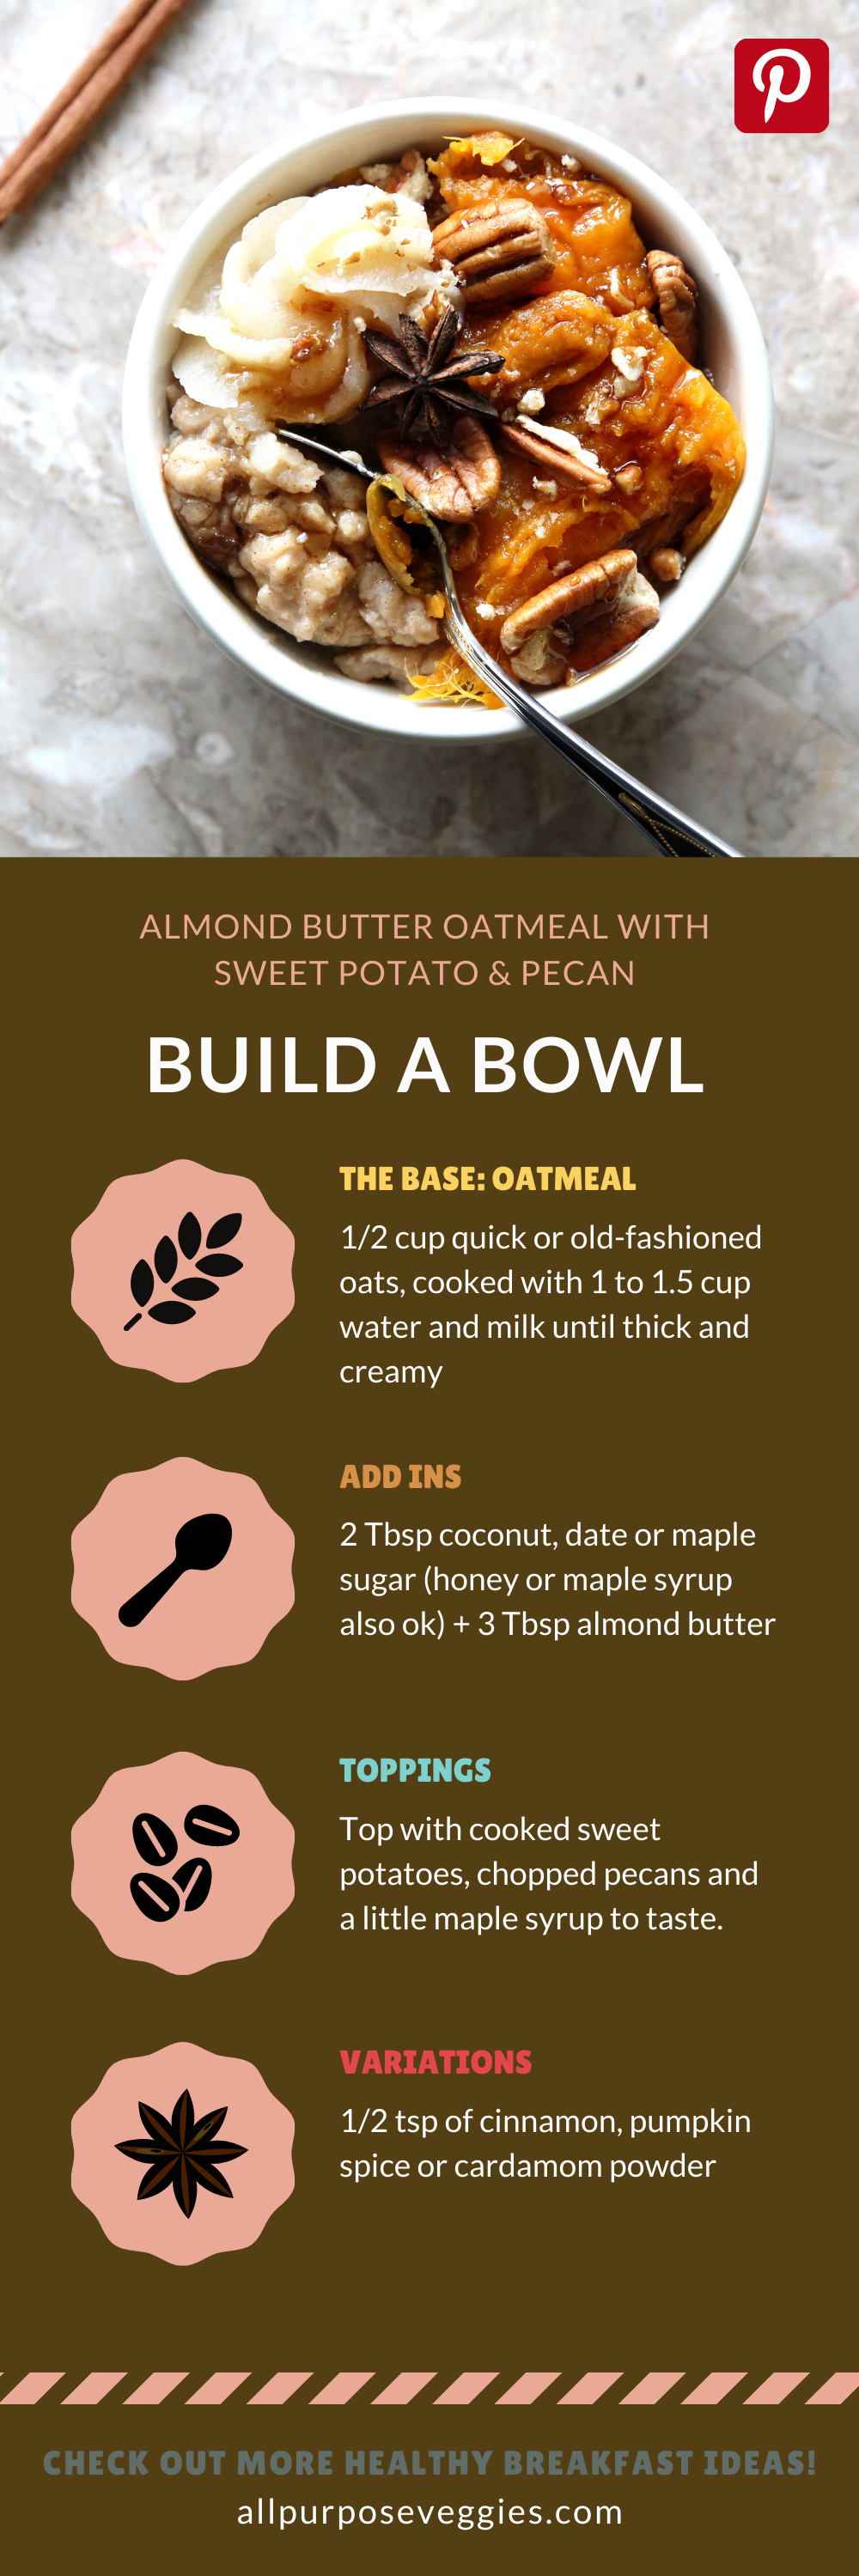 Build a Bowl Guide to Almond Butter Oatmeal with Sweet Potato & Pecan